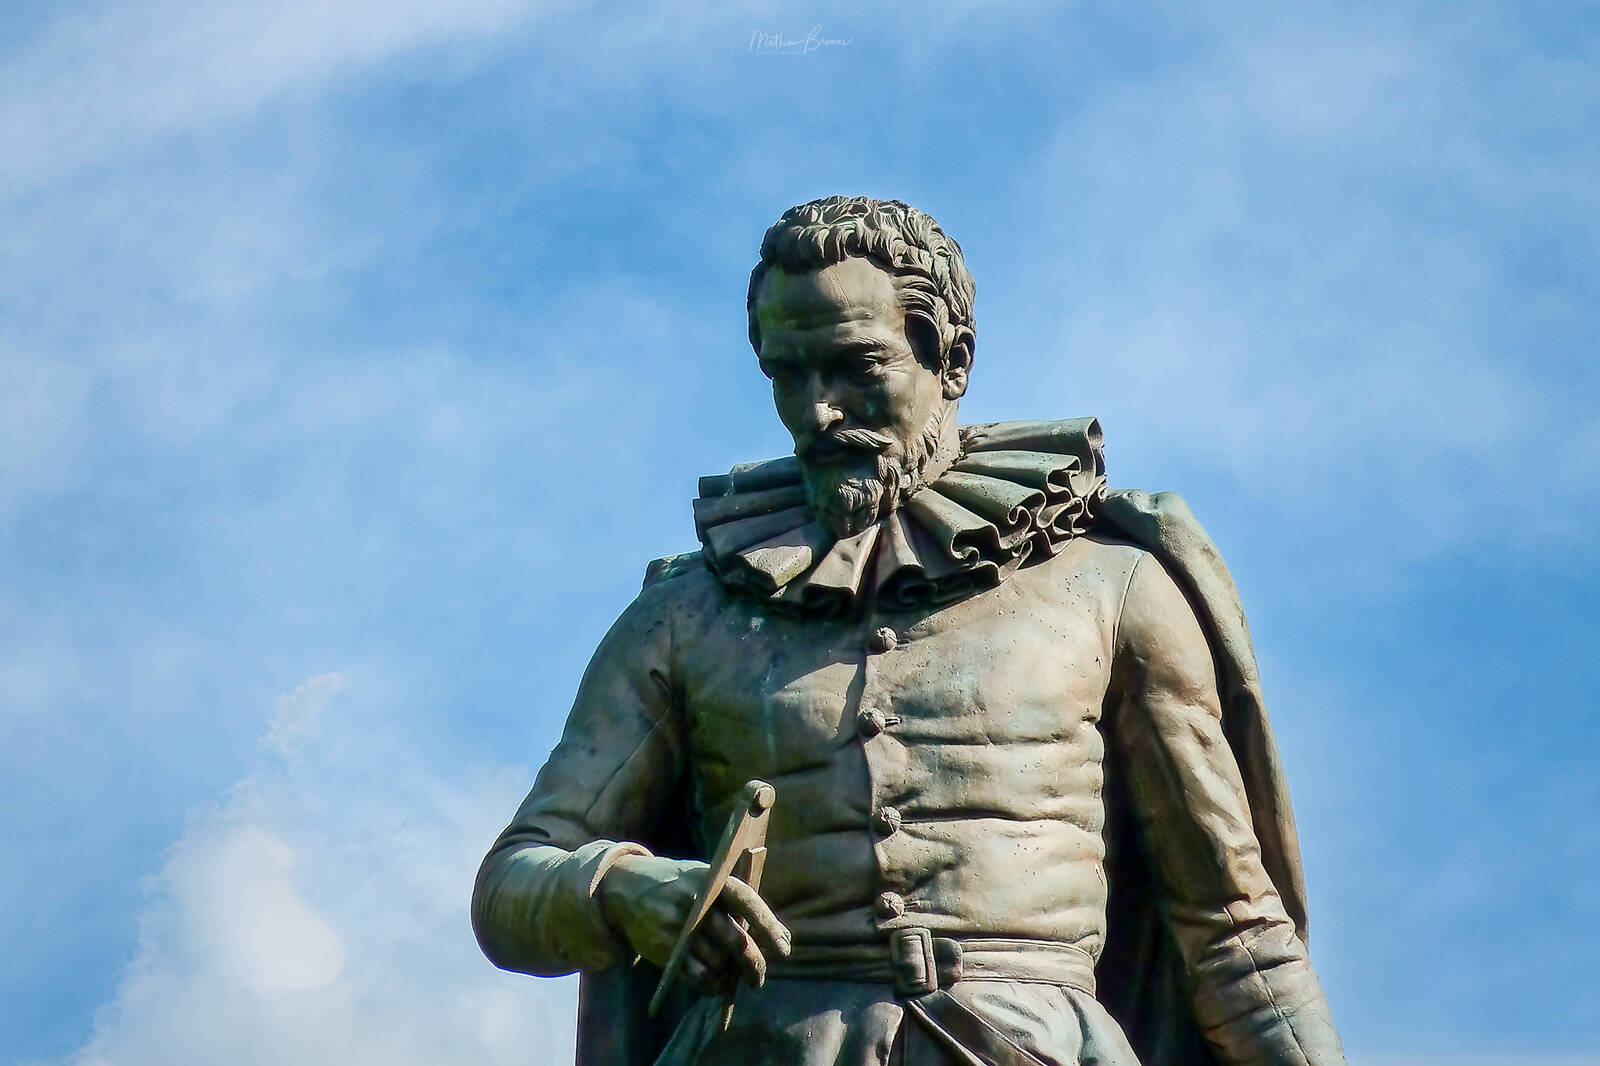 Image of Statue of Simon Stevin by Mathew Browne